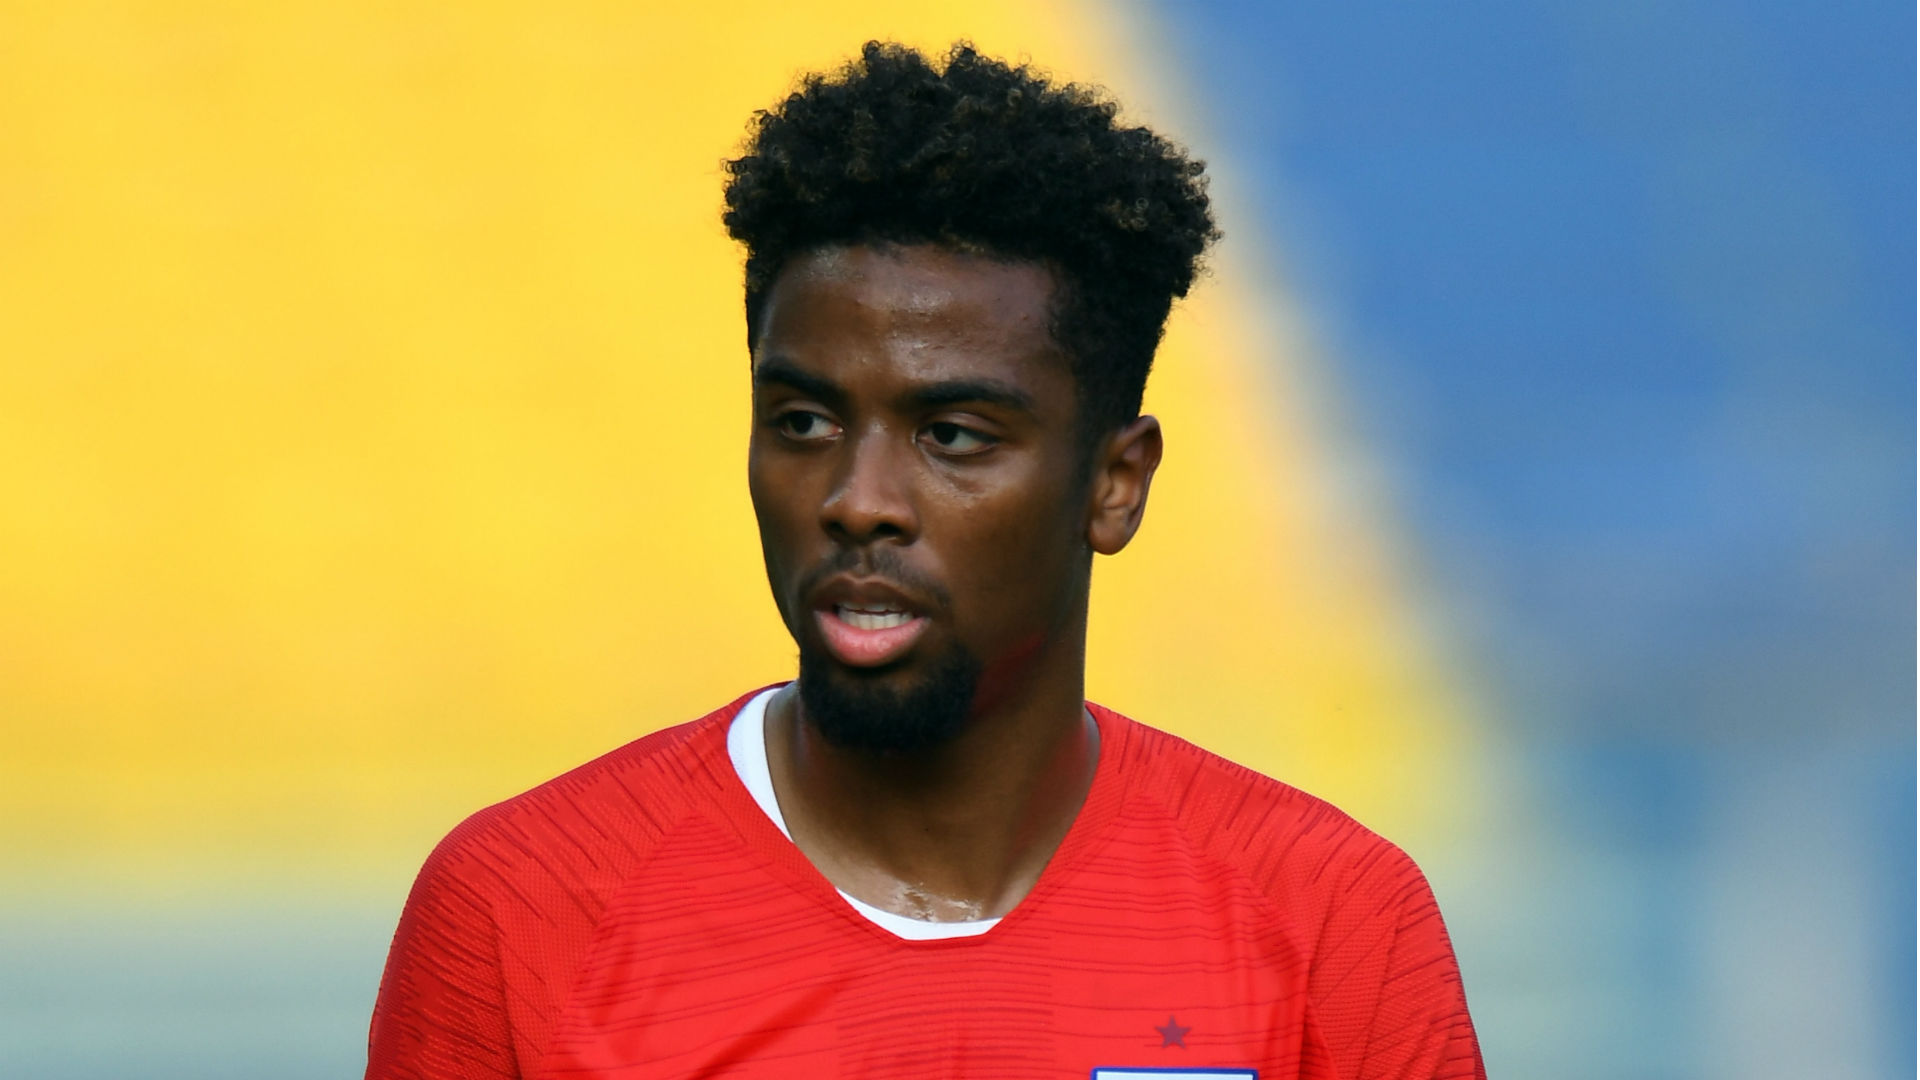 Angel Gomes has joined Lille after leaving Manchester United, though he will have to wait to make his debut for the Ligue 1 side.